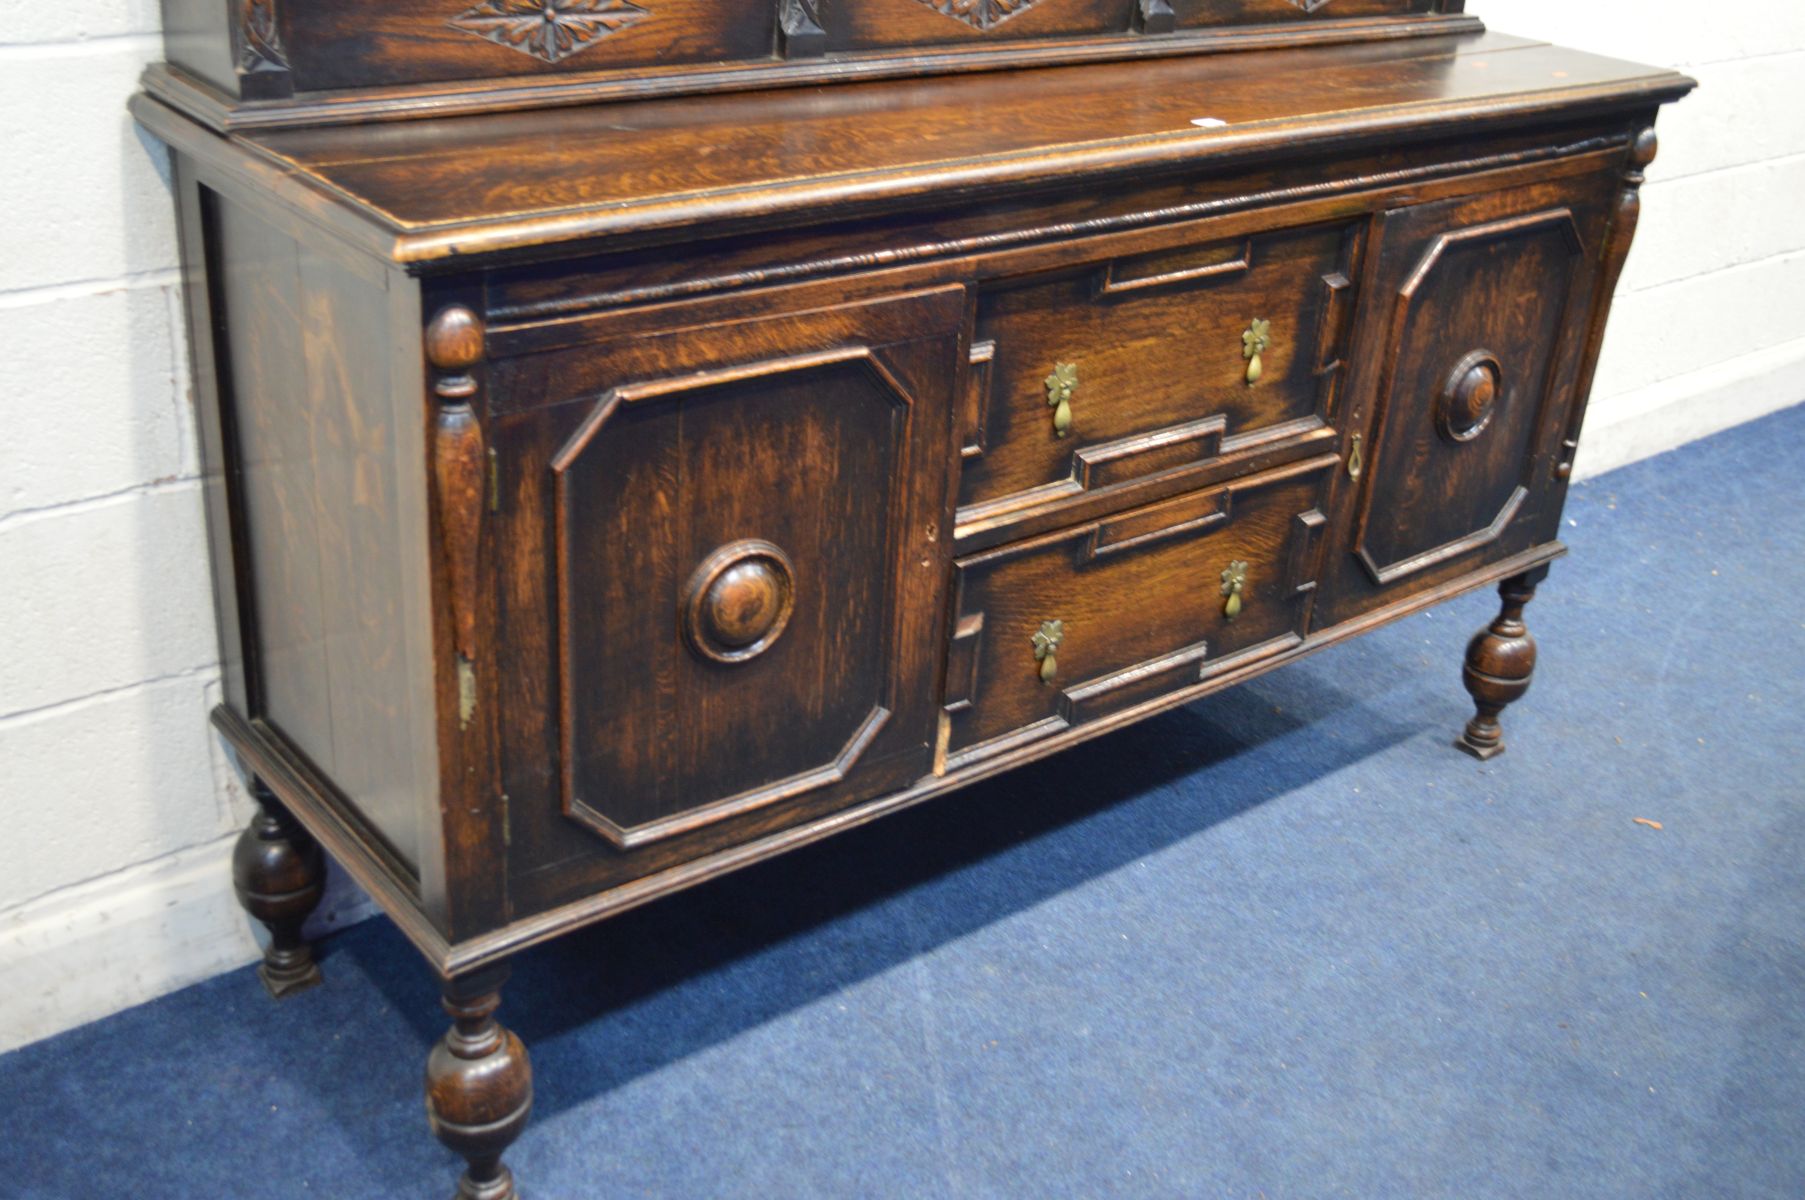 AN EARLY 20TH CENTURY OAK DRESSER, the top section with two open shelves flanking a single - Image 4 of 5